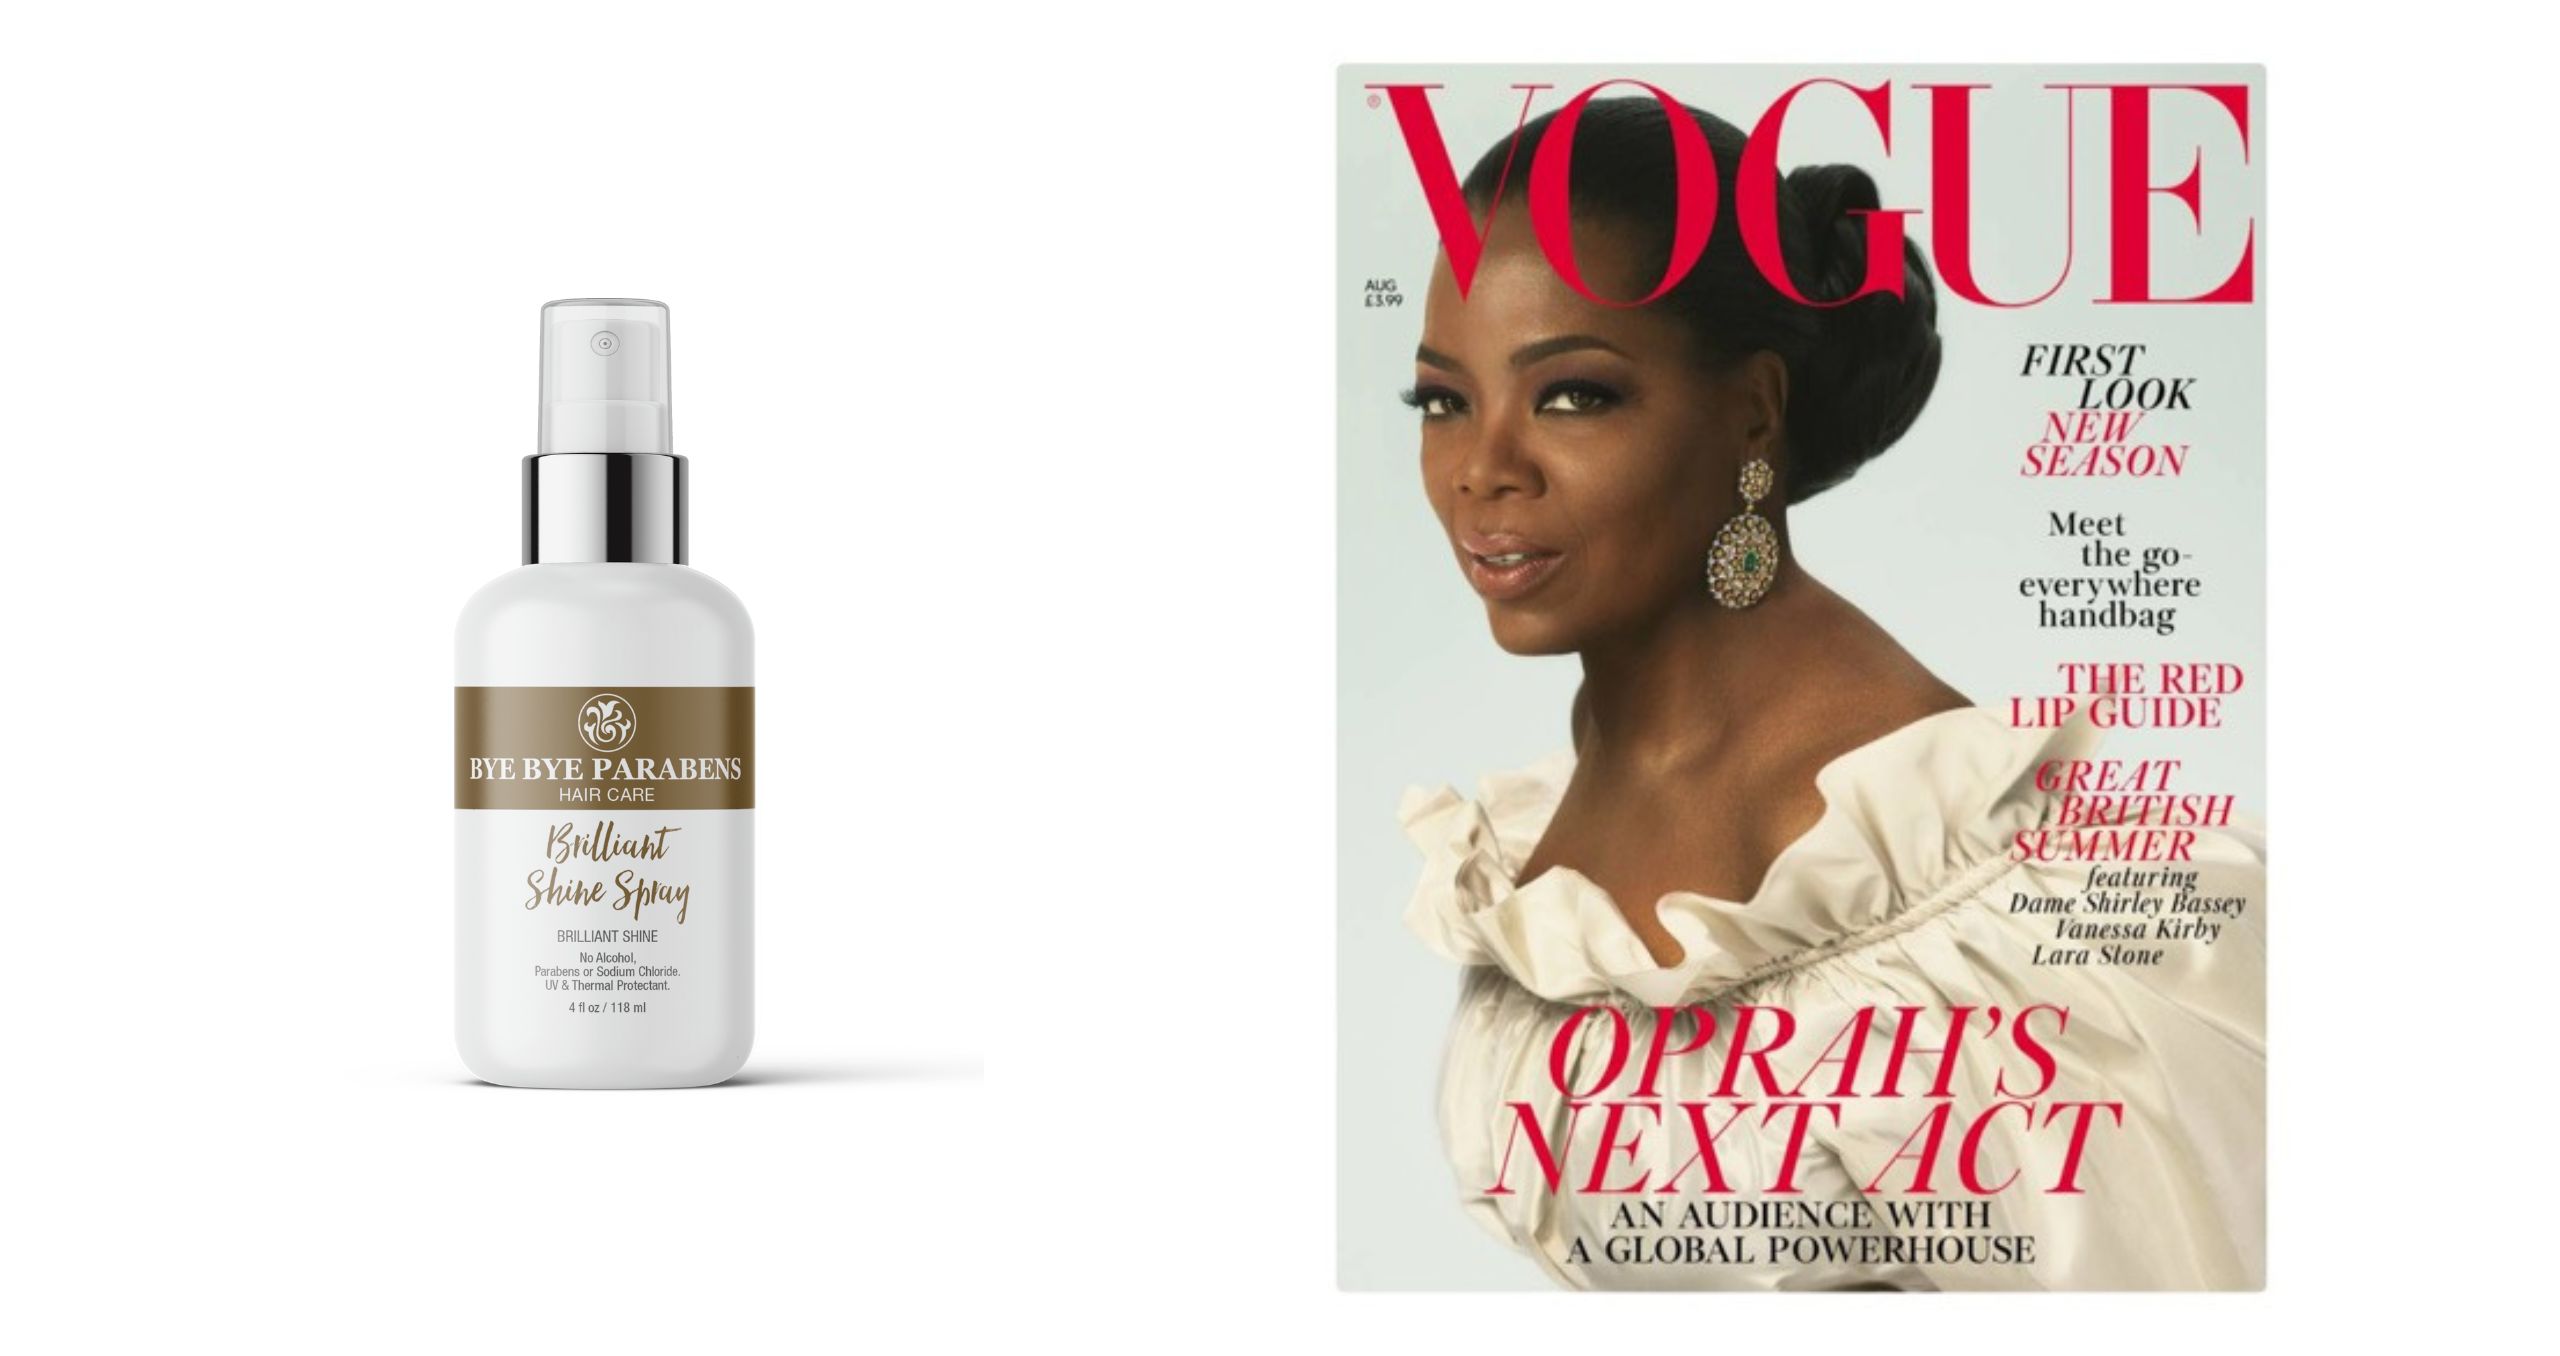 VOGUE with Oprah cover